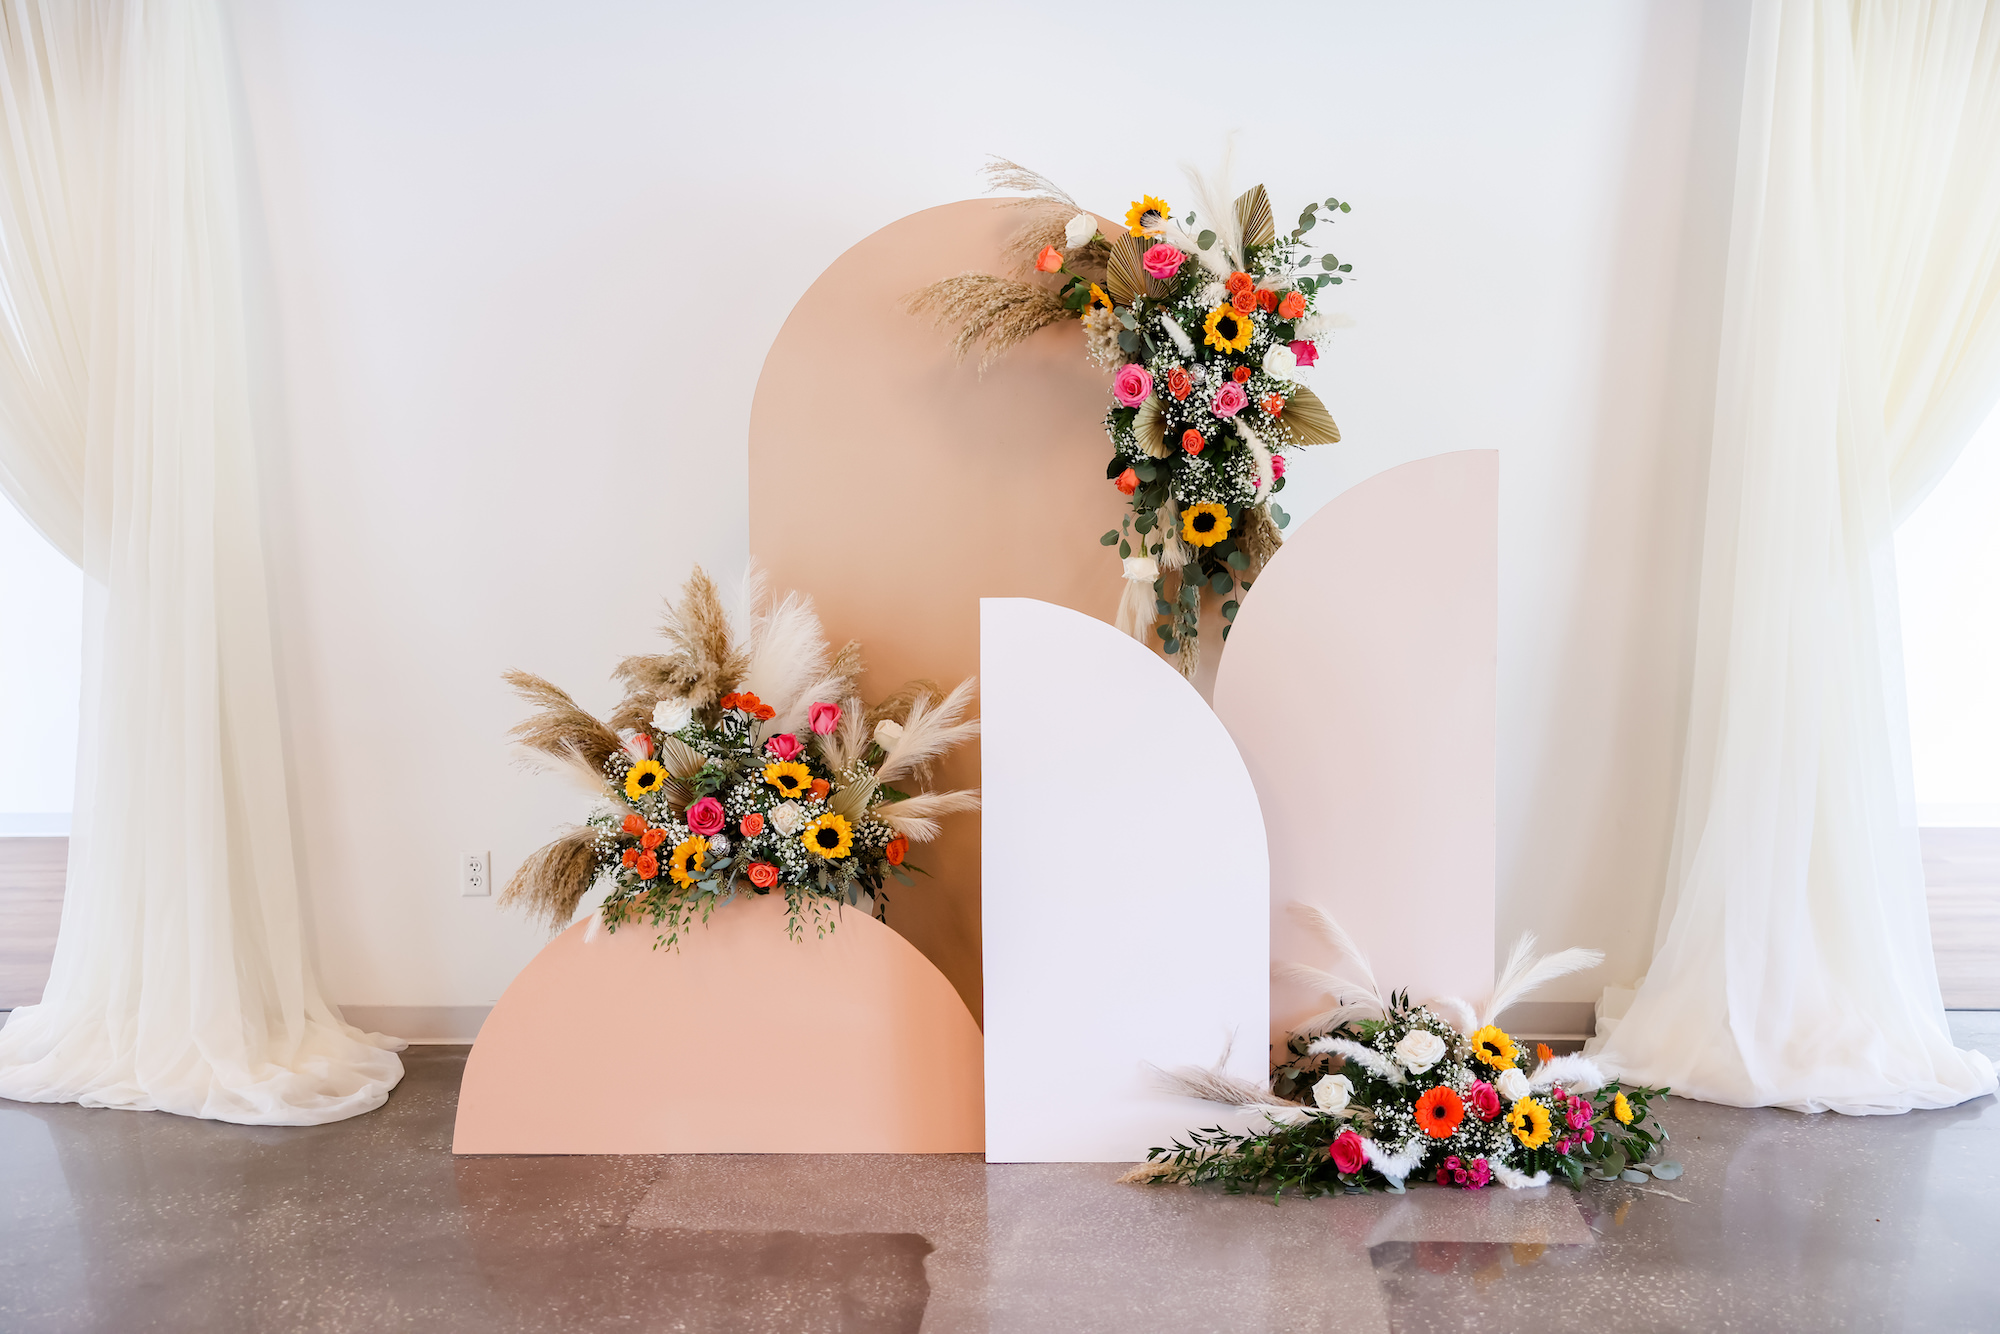 Geometric Neutral Retro Boho Wedding Ceremony Altar Backdrop with Asymmetrical Floral Arch Arrangements | Tampa Bay Rentals Outside the Box Rentals